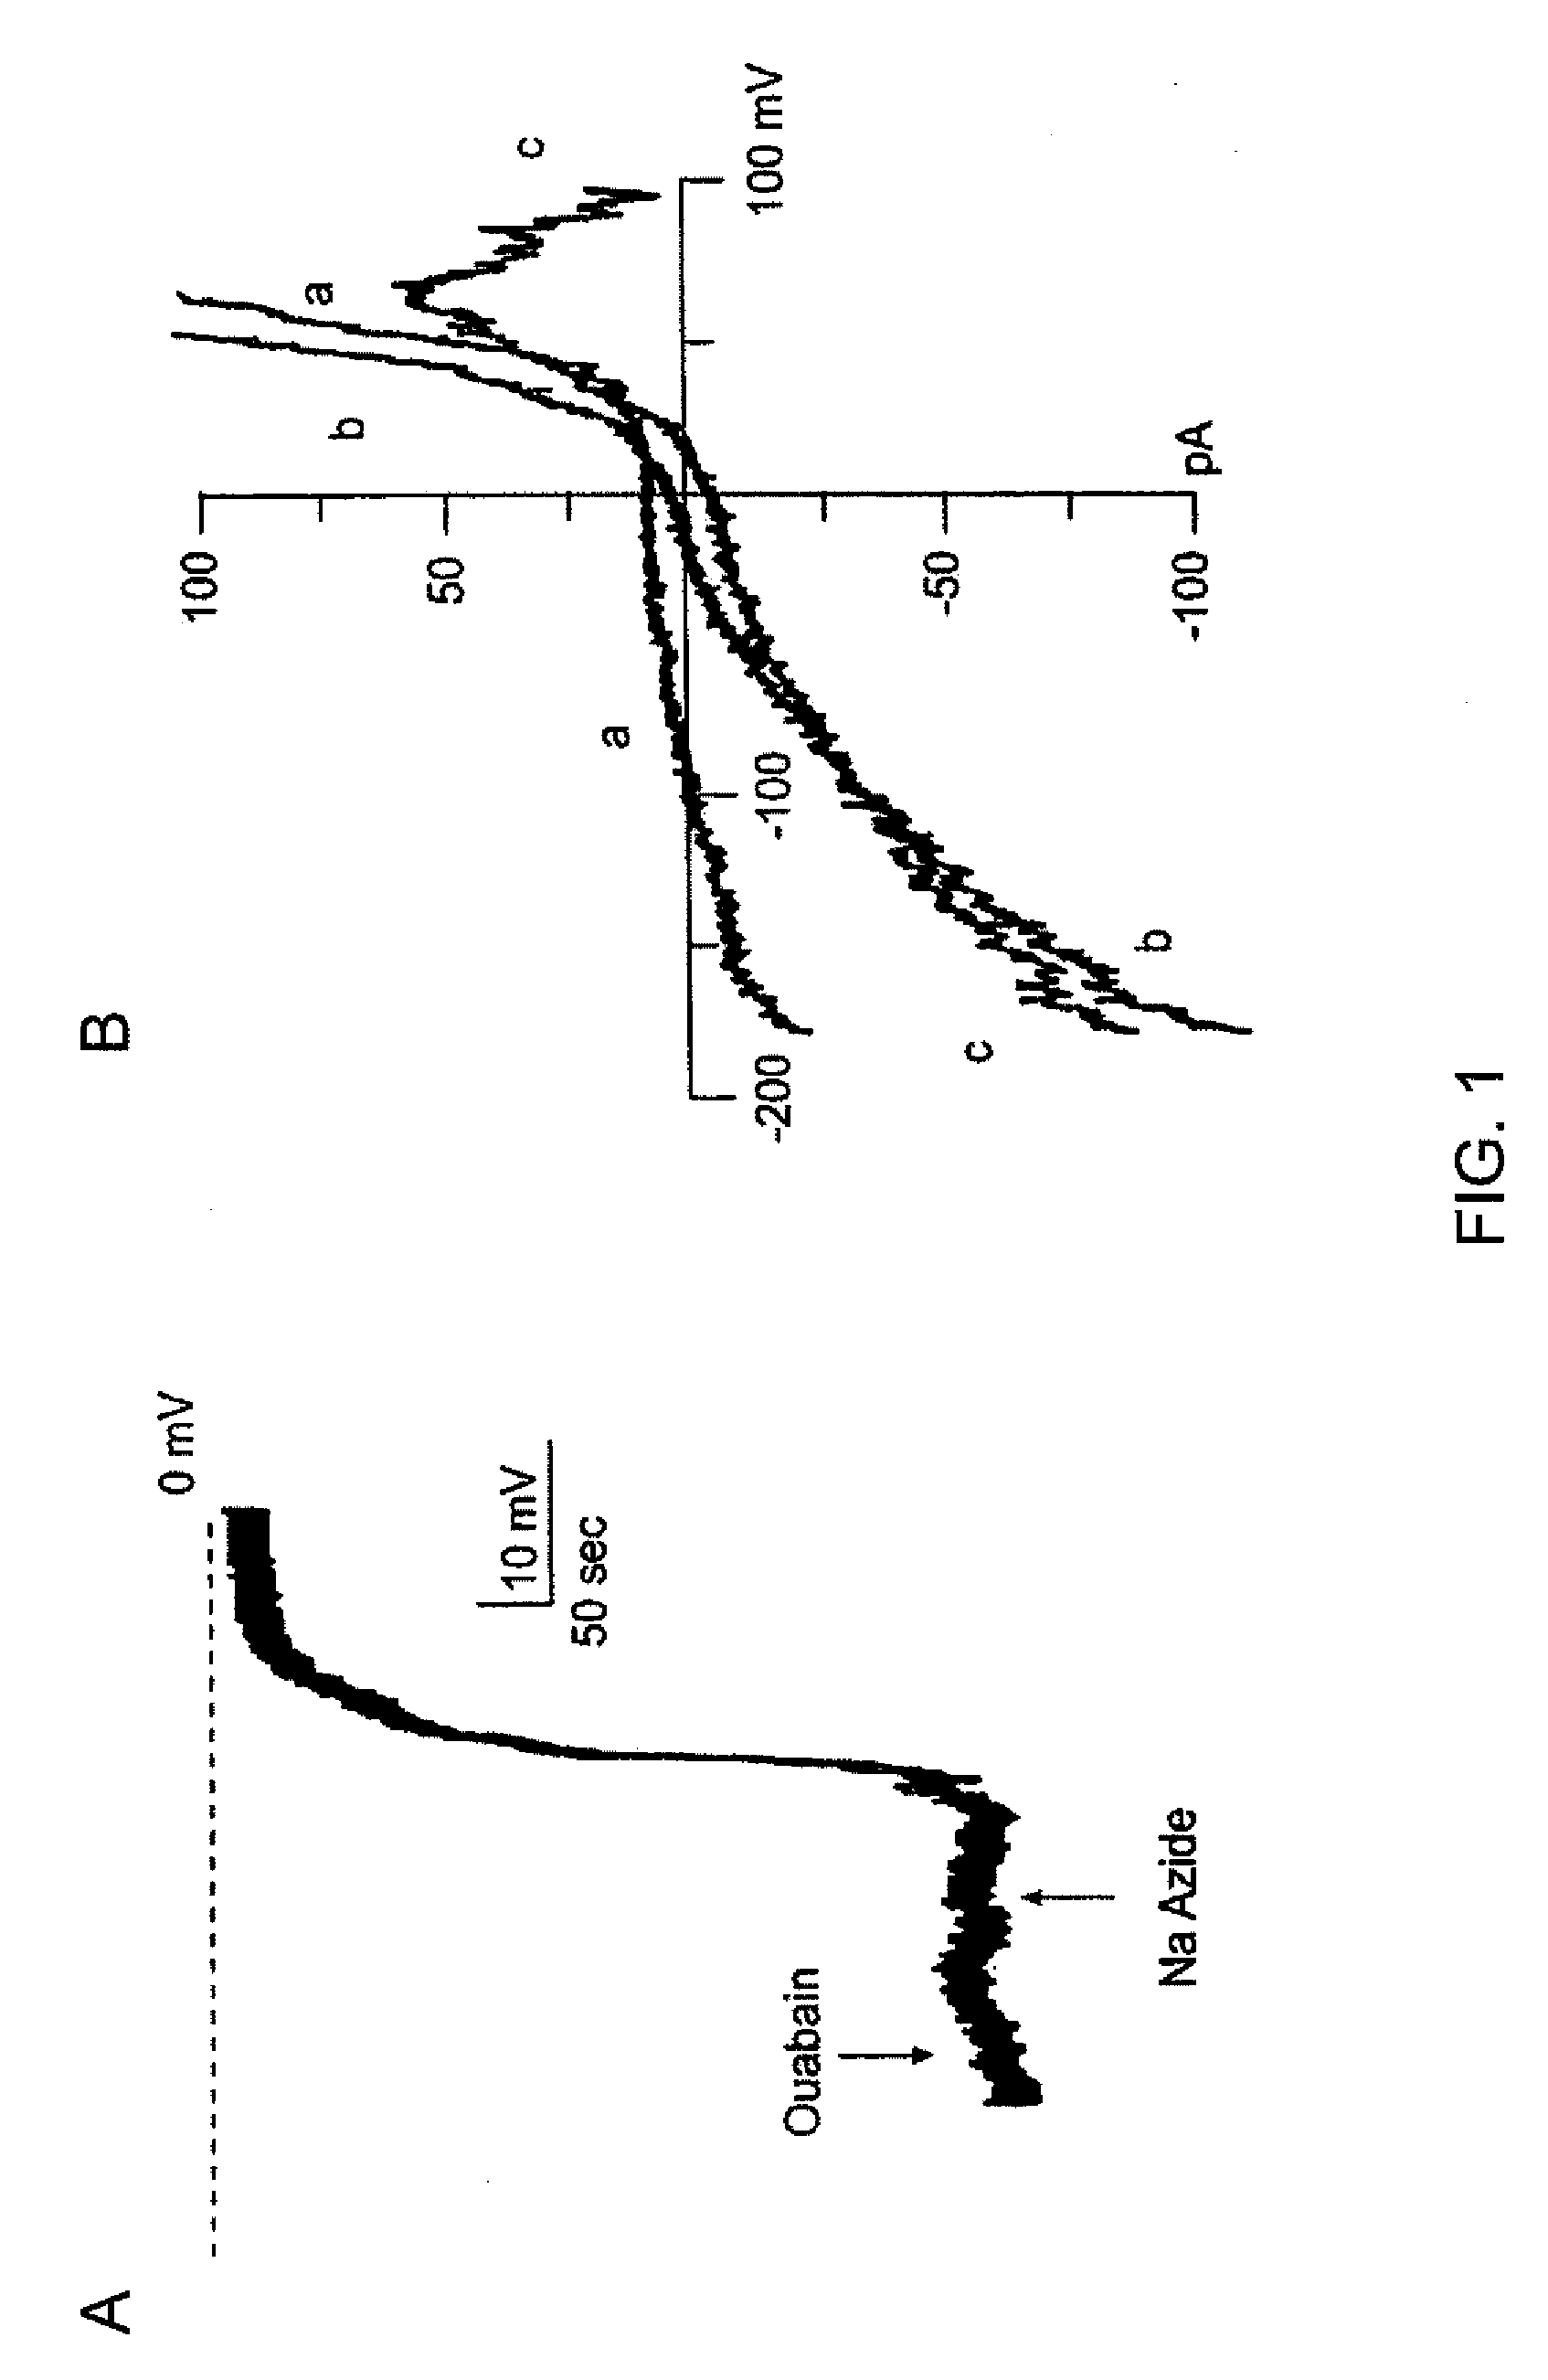 Novel non-selective cation channel in neuronal cells and method for treating brain swelling